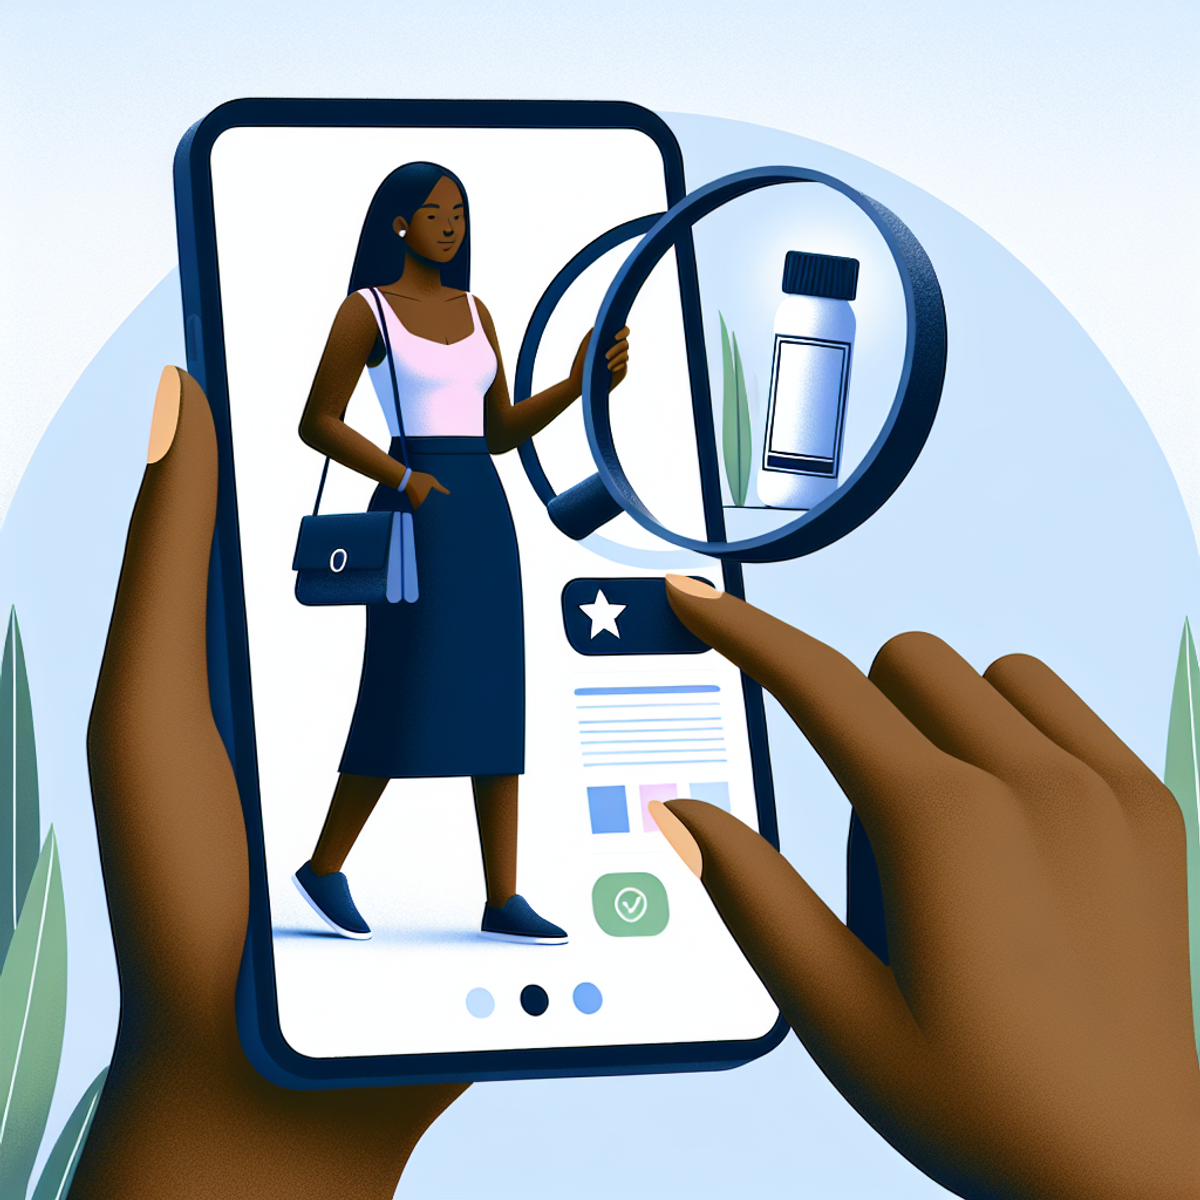 A Black woman stands indoors, holding a smartphone with a magnifying glass icon hovering over an image of a product on the screen, showing satisfaction and ease of using visual search technology for online shopping.